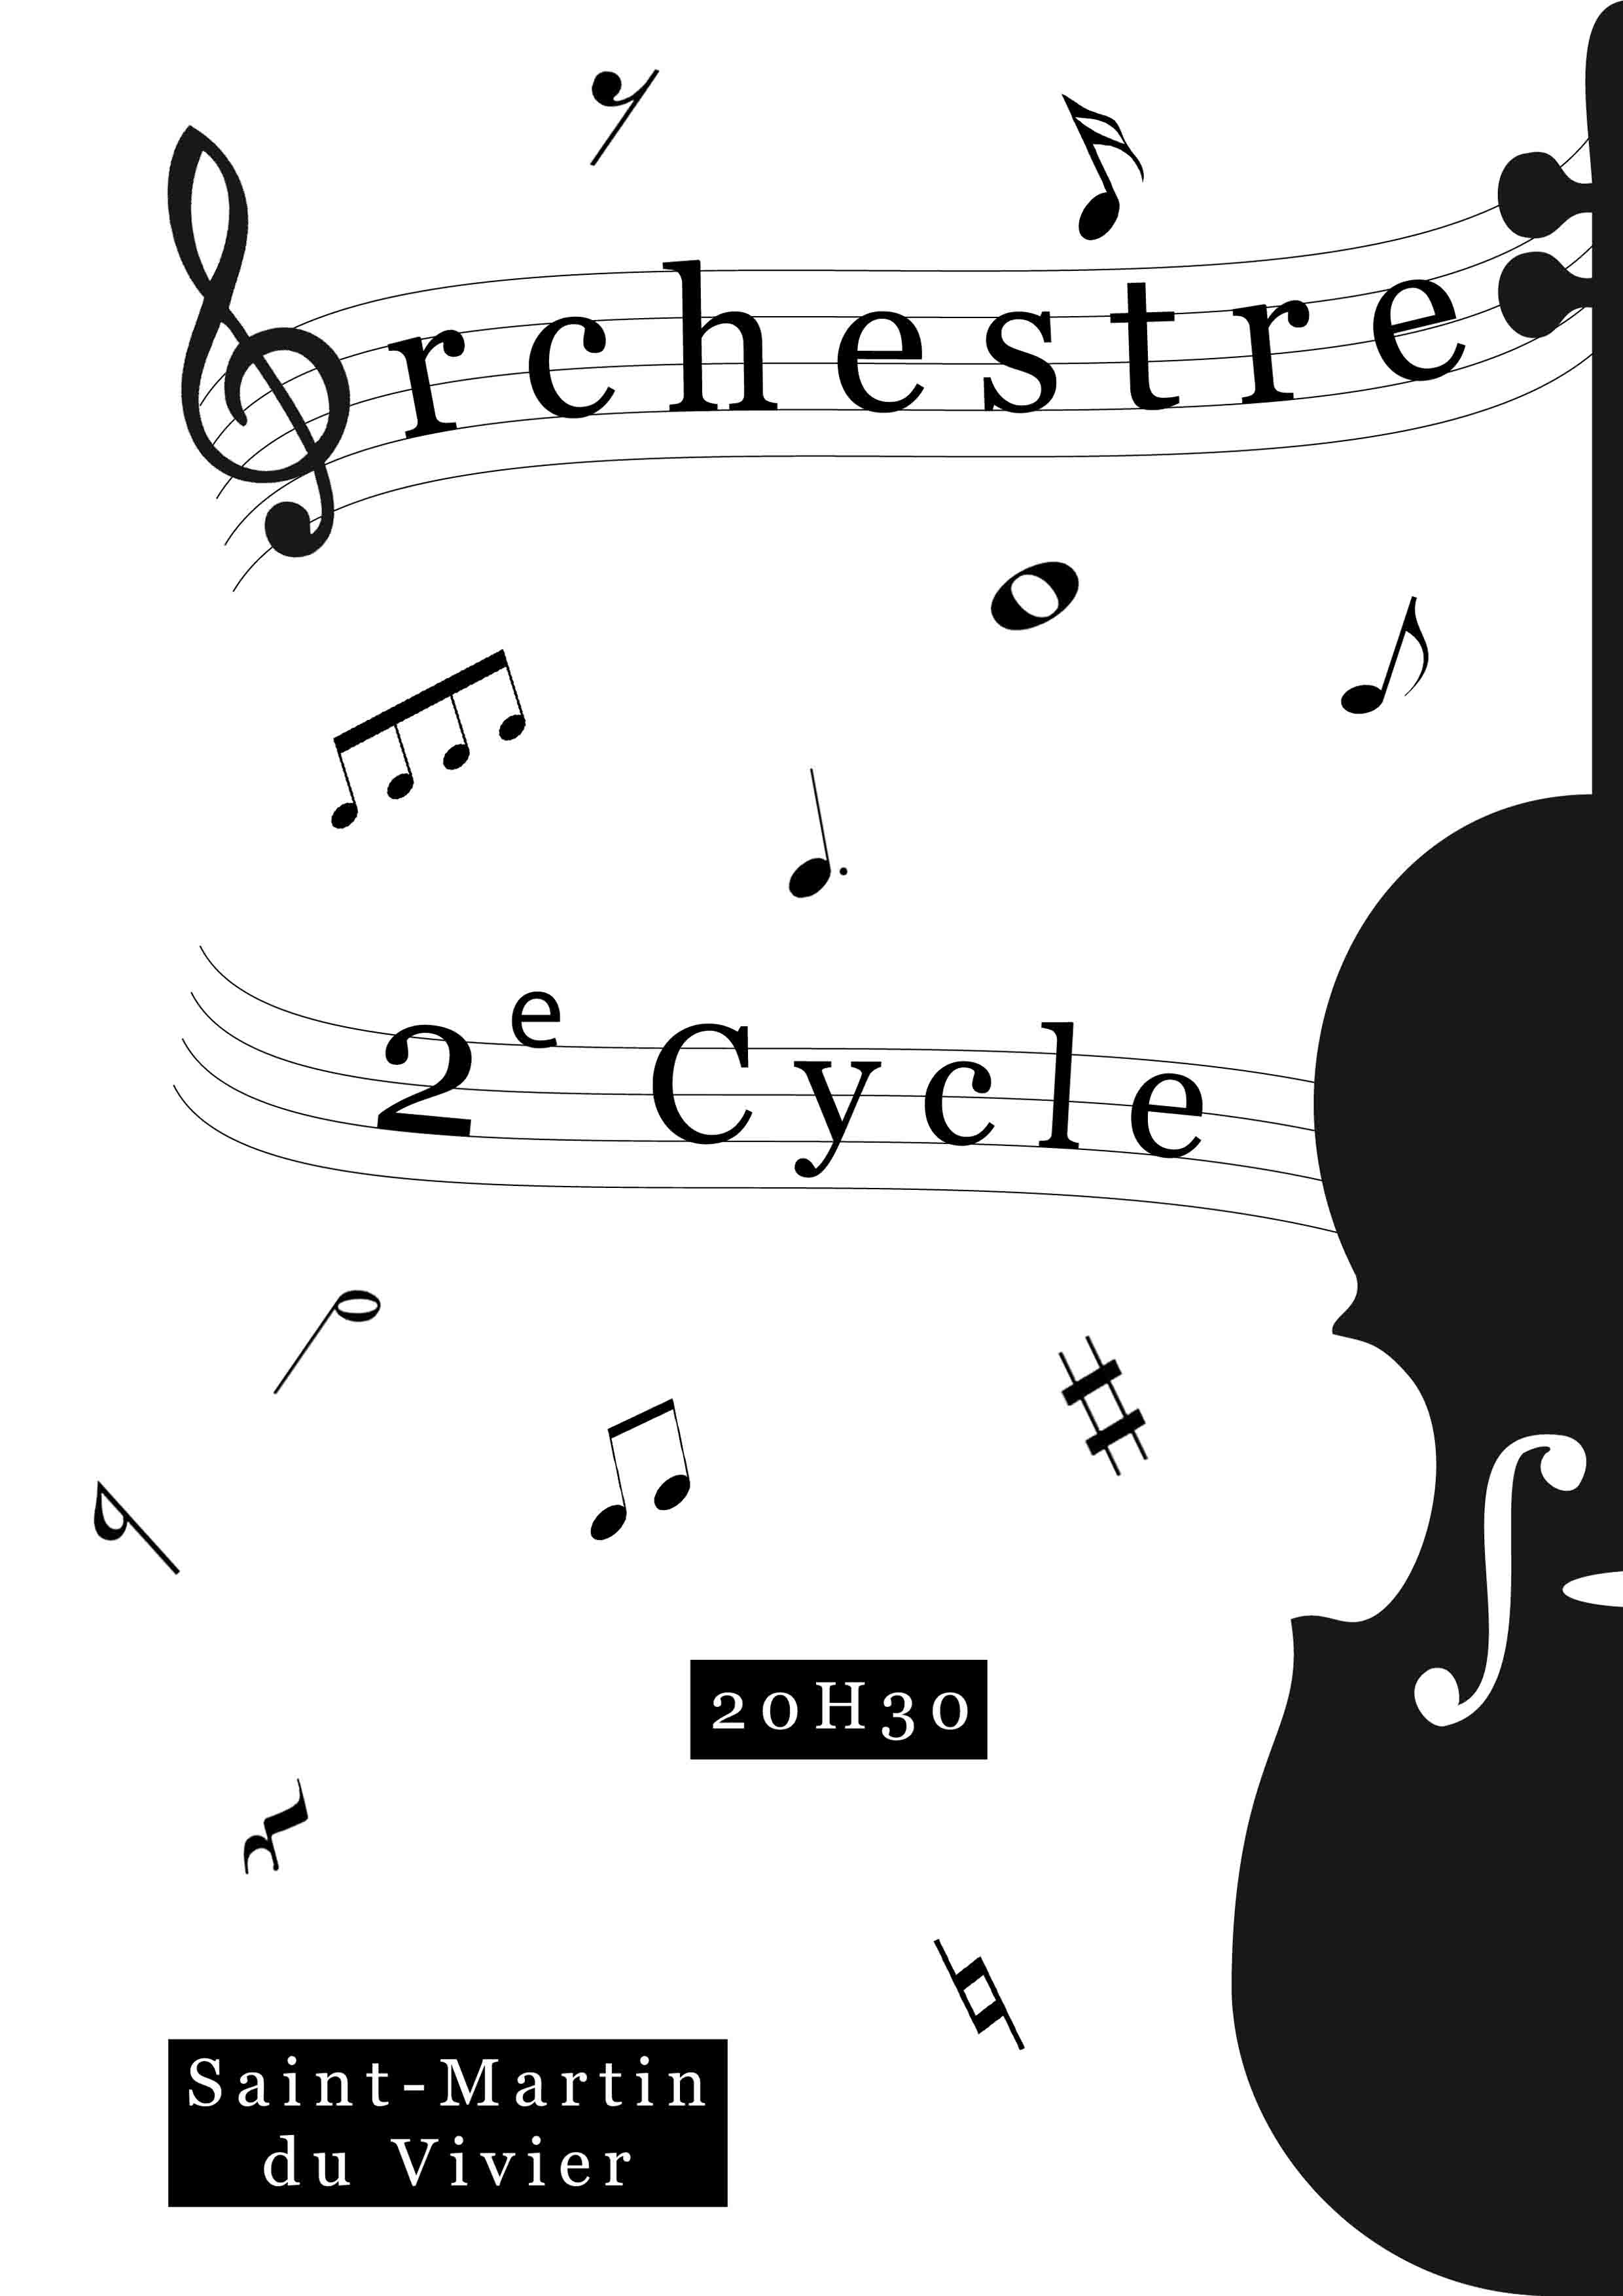 • Affiche Concert Orchestre II°Cycle •